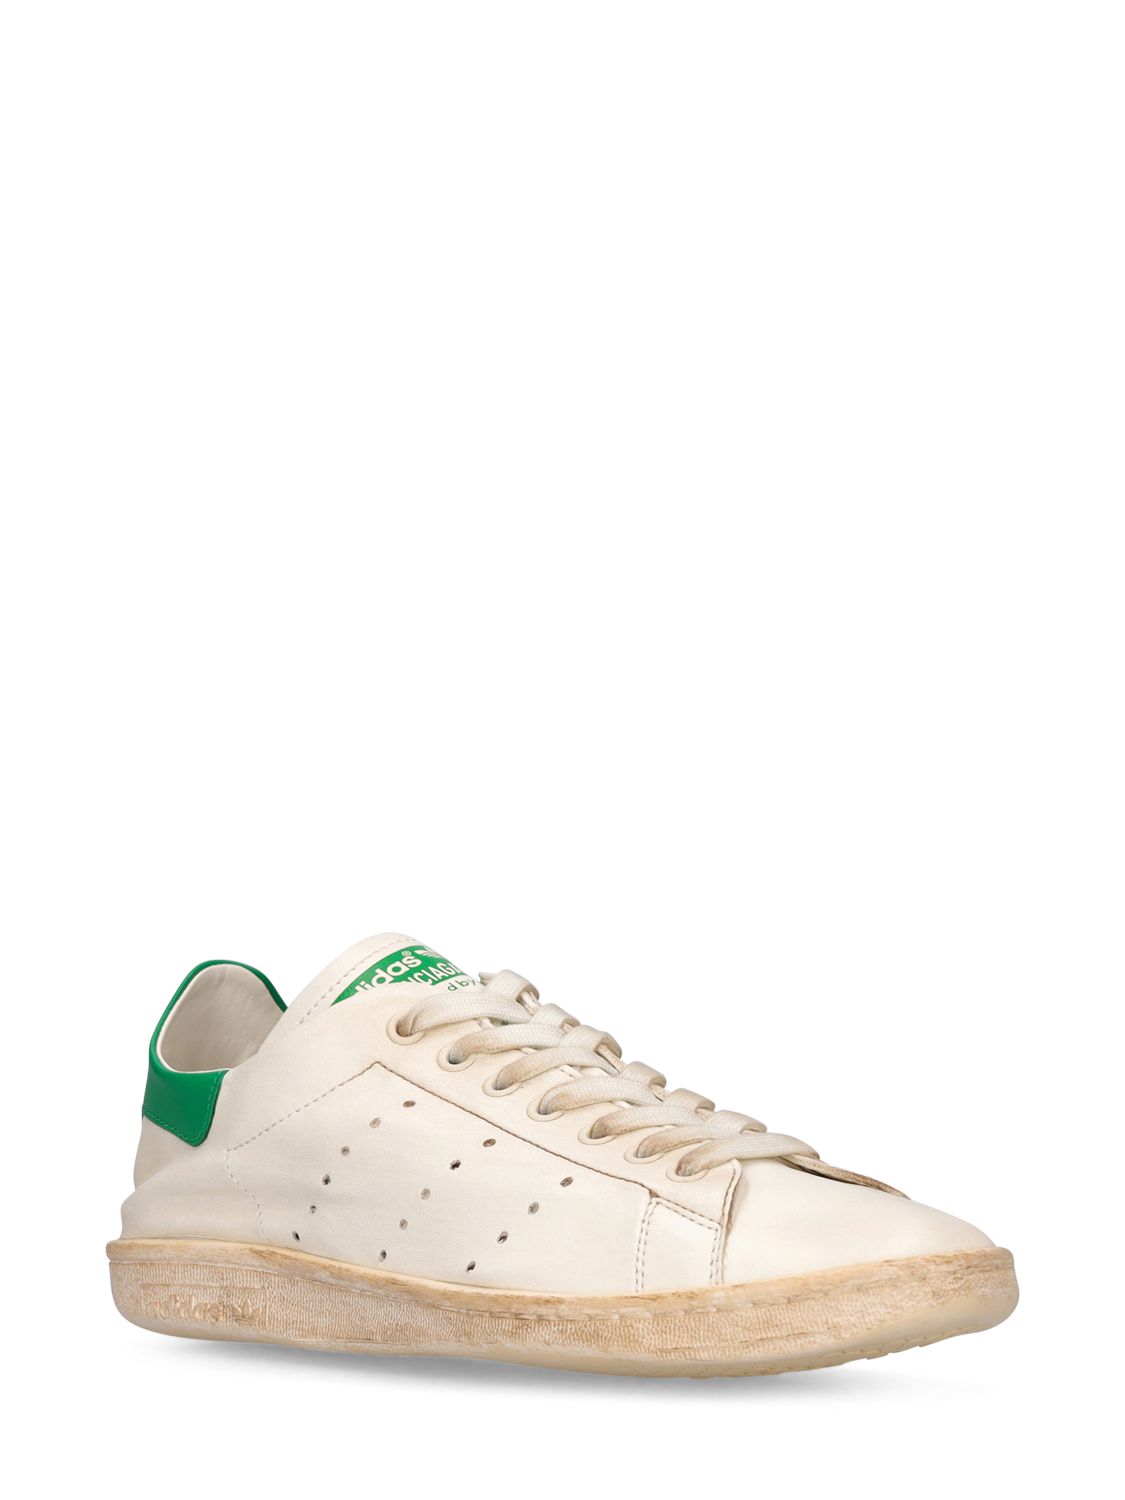 Shop Balenciaga 20mm Stan Smith Leather Sneakers In White,green